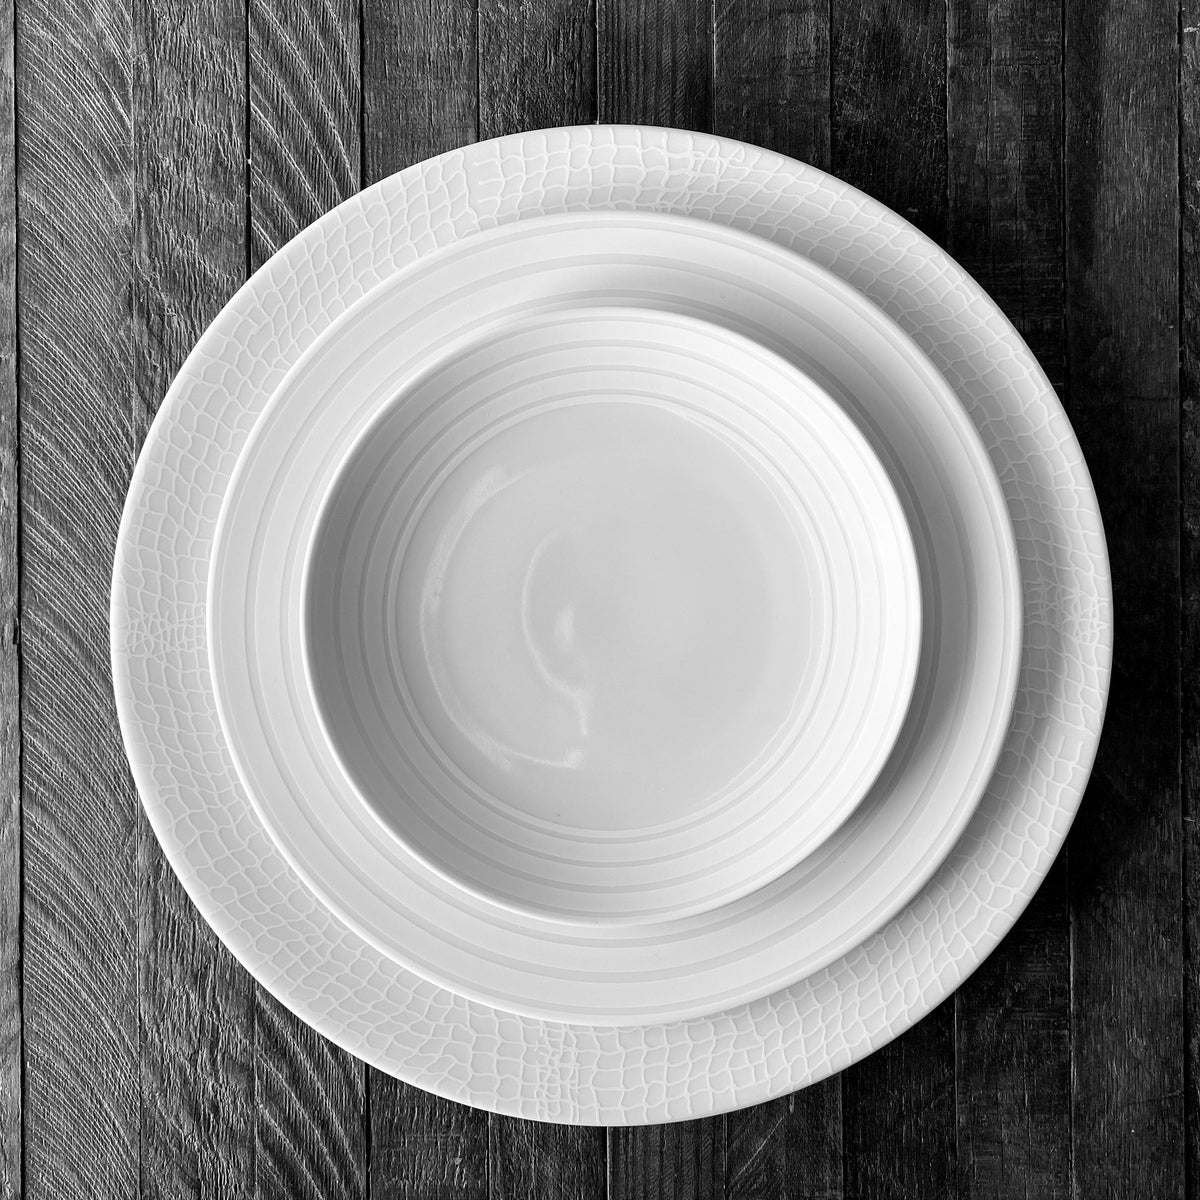 A high-fired porcelain bowl neatly placed inside a Cambridge Stripe Rimmed Salad Plate by Caskata Artisanal Home, which in turn rests on a larger white dinner plate, all elegantly arranged on a dark wooden surface.